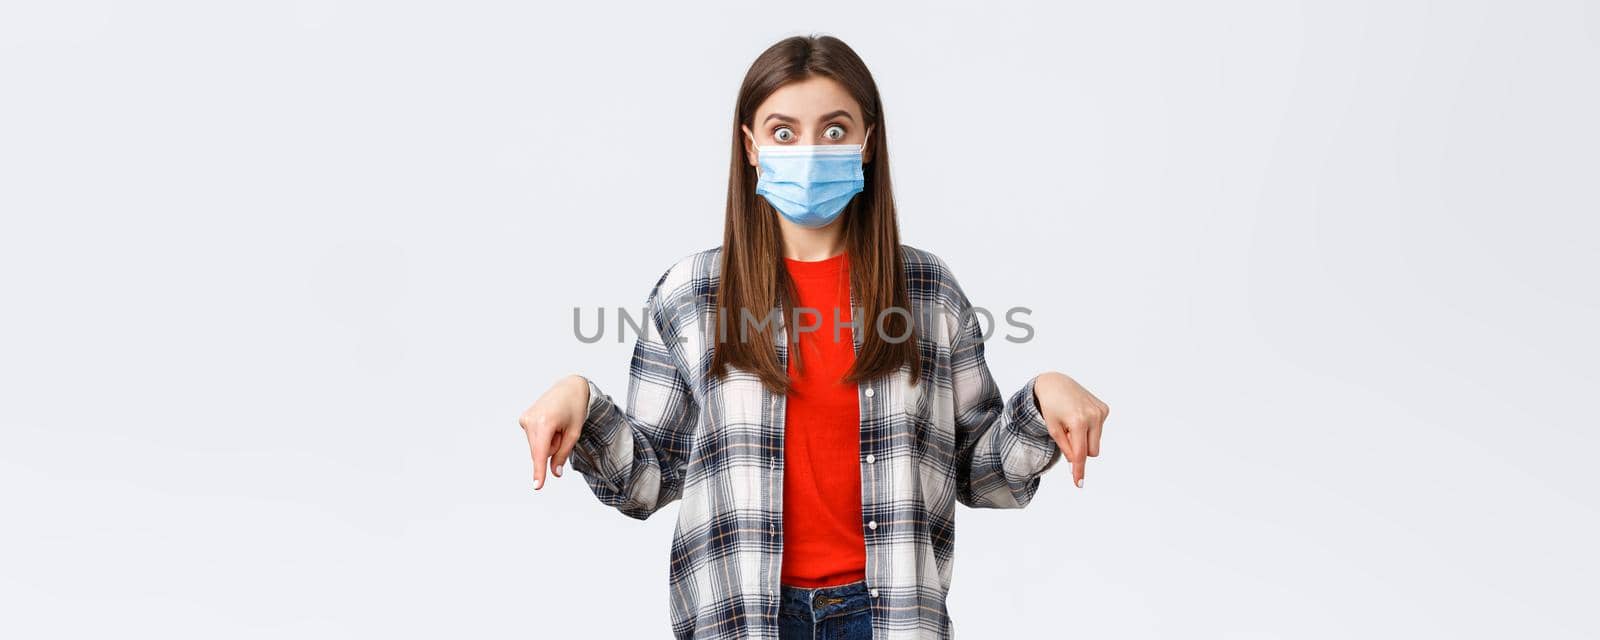 Coronavirus outbreak, leisure on quarantine, social distancing and emotions concept. Shocked and impressed young woman in medical mask and casual outfit, pointing fingers down, stare camera.